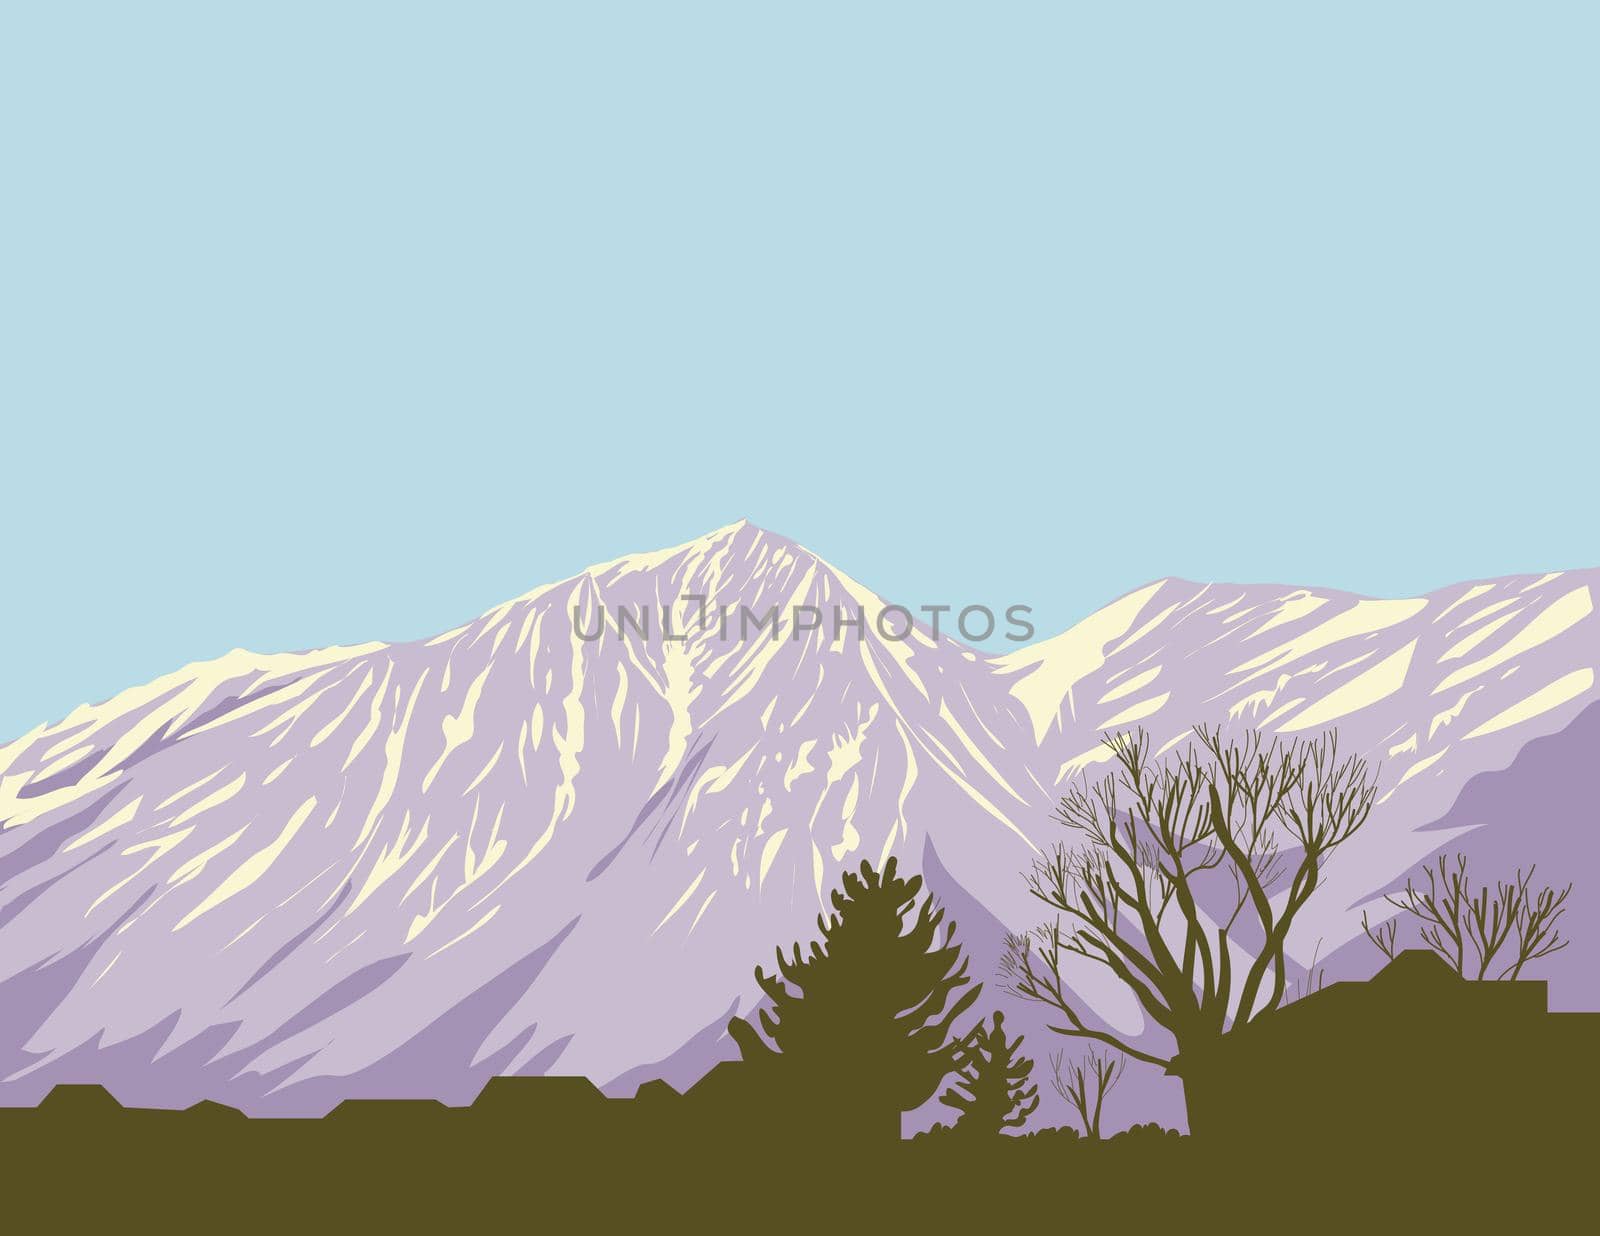 WPA poster art of Monument Peak and East Peak in South Lake Tahoe as viewed from Gardnerville in Douglas County, Nevada, United States USA done in works project administration style.